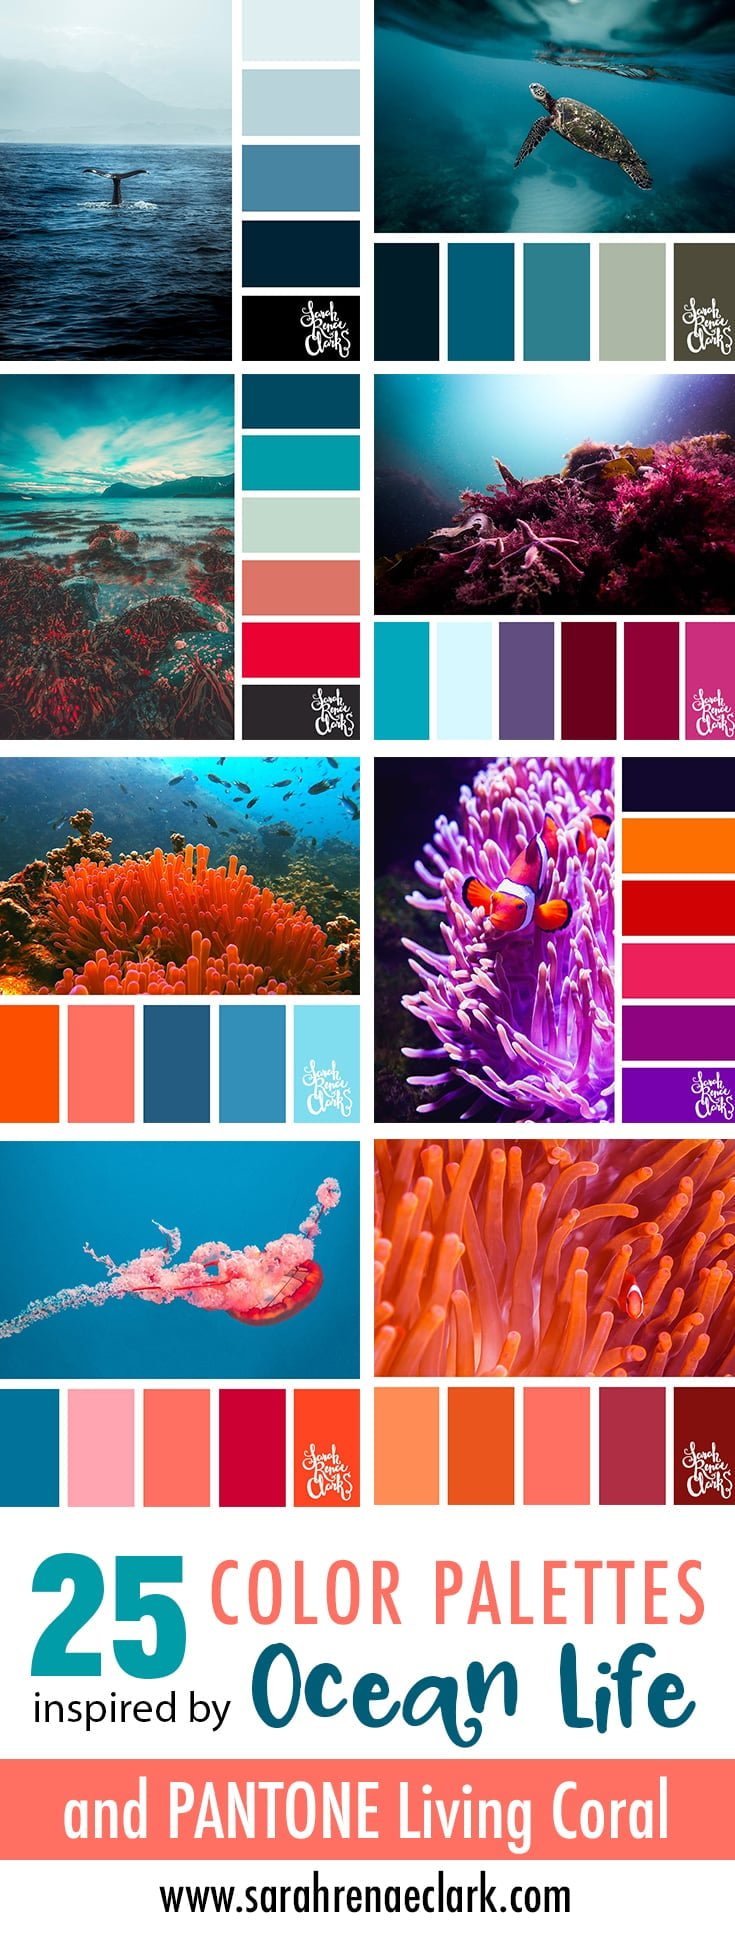 25 Color Palettes inspired by Ocean Life and PANTONE Living Coral